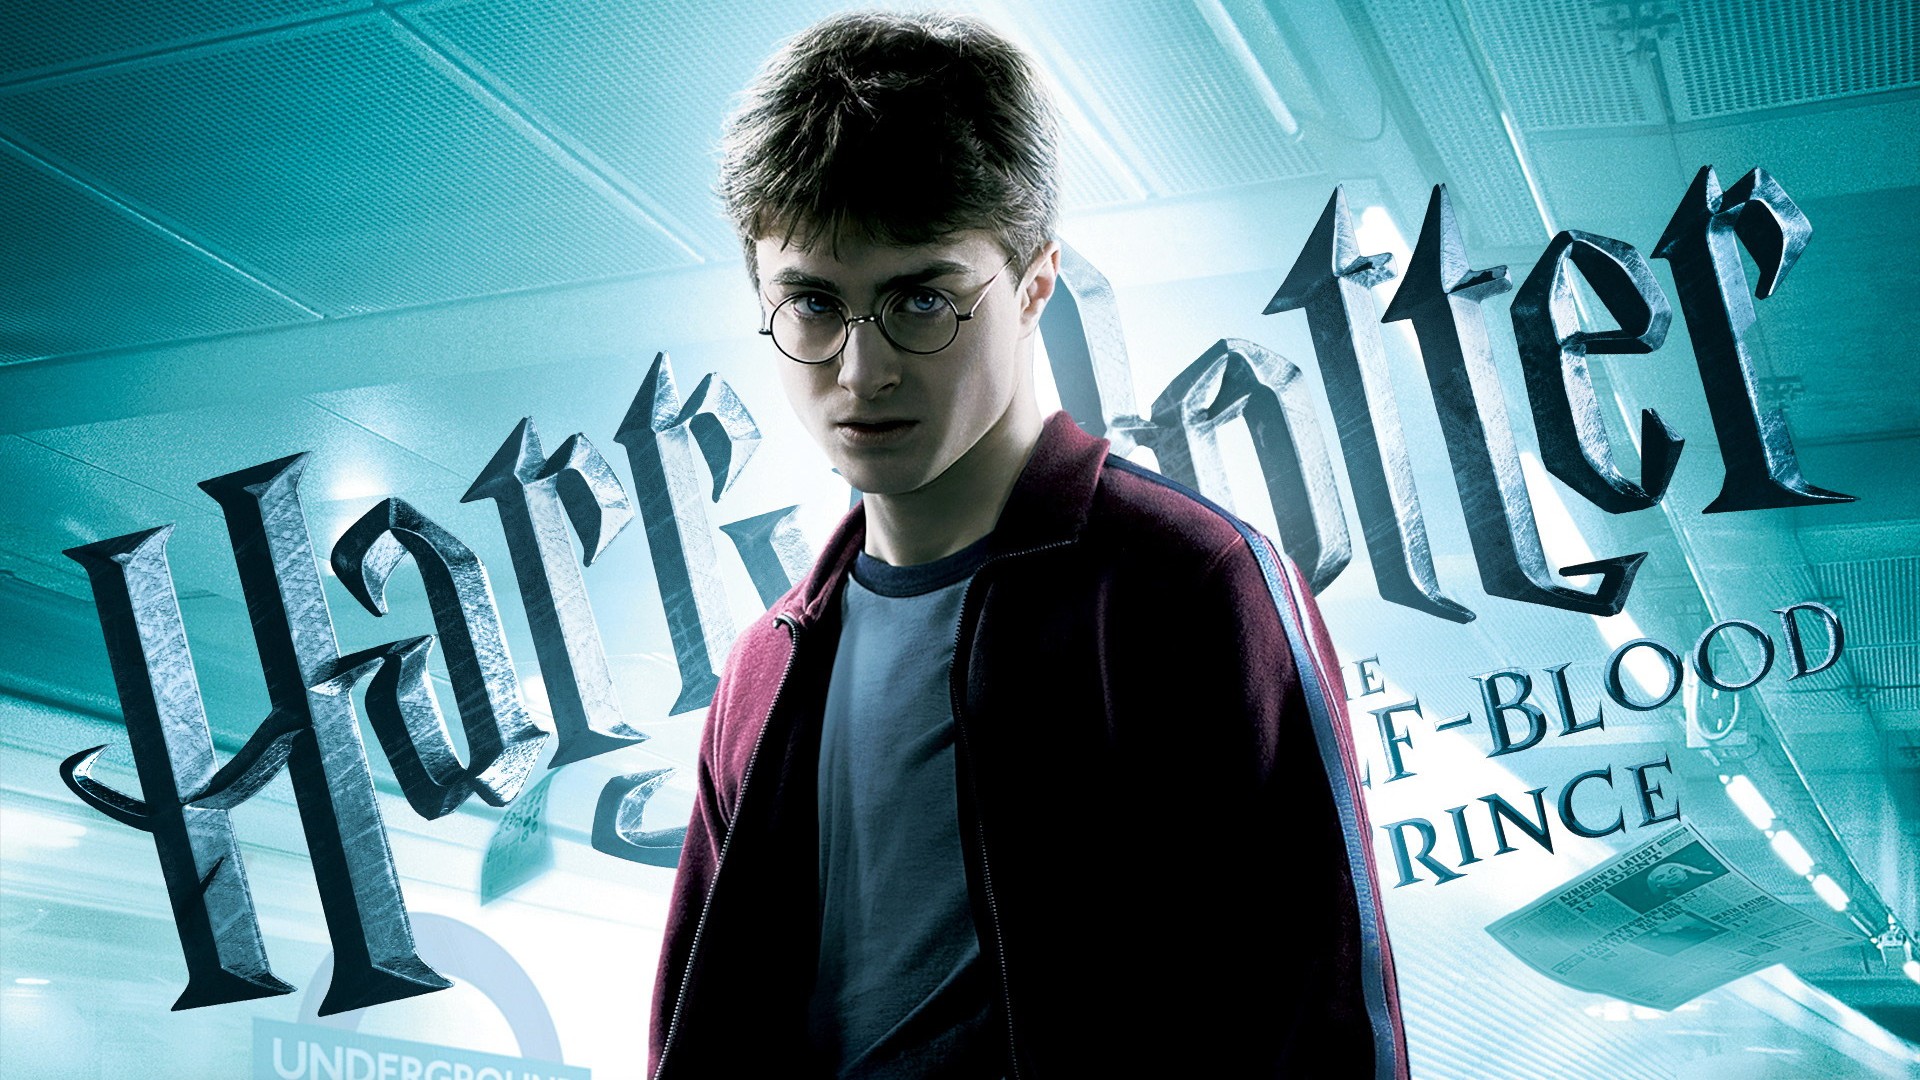 Harry Potter and the Half-Blood Prince wallpaper #2 - 1920x1080